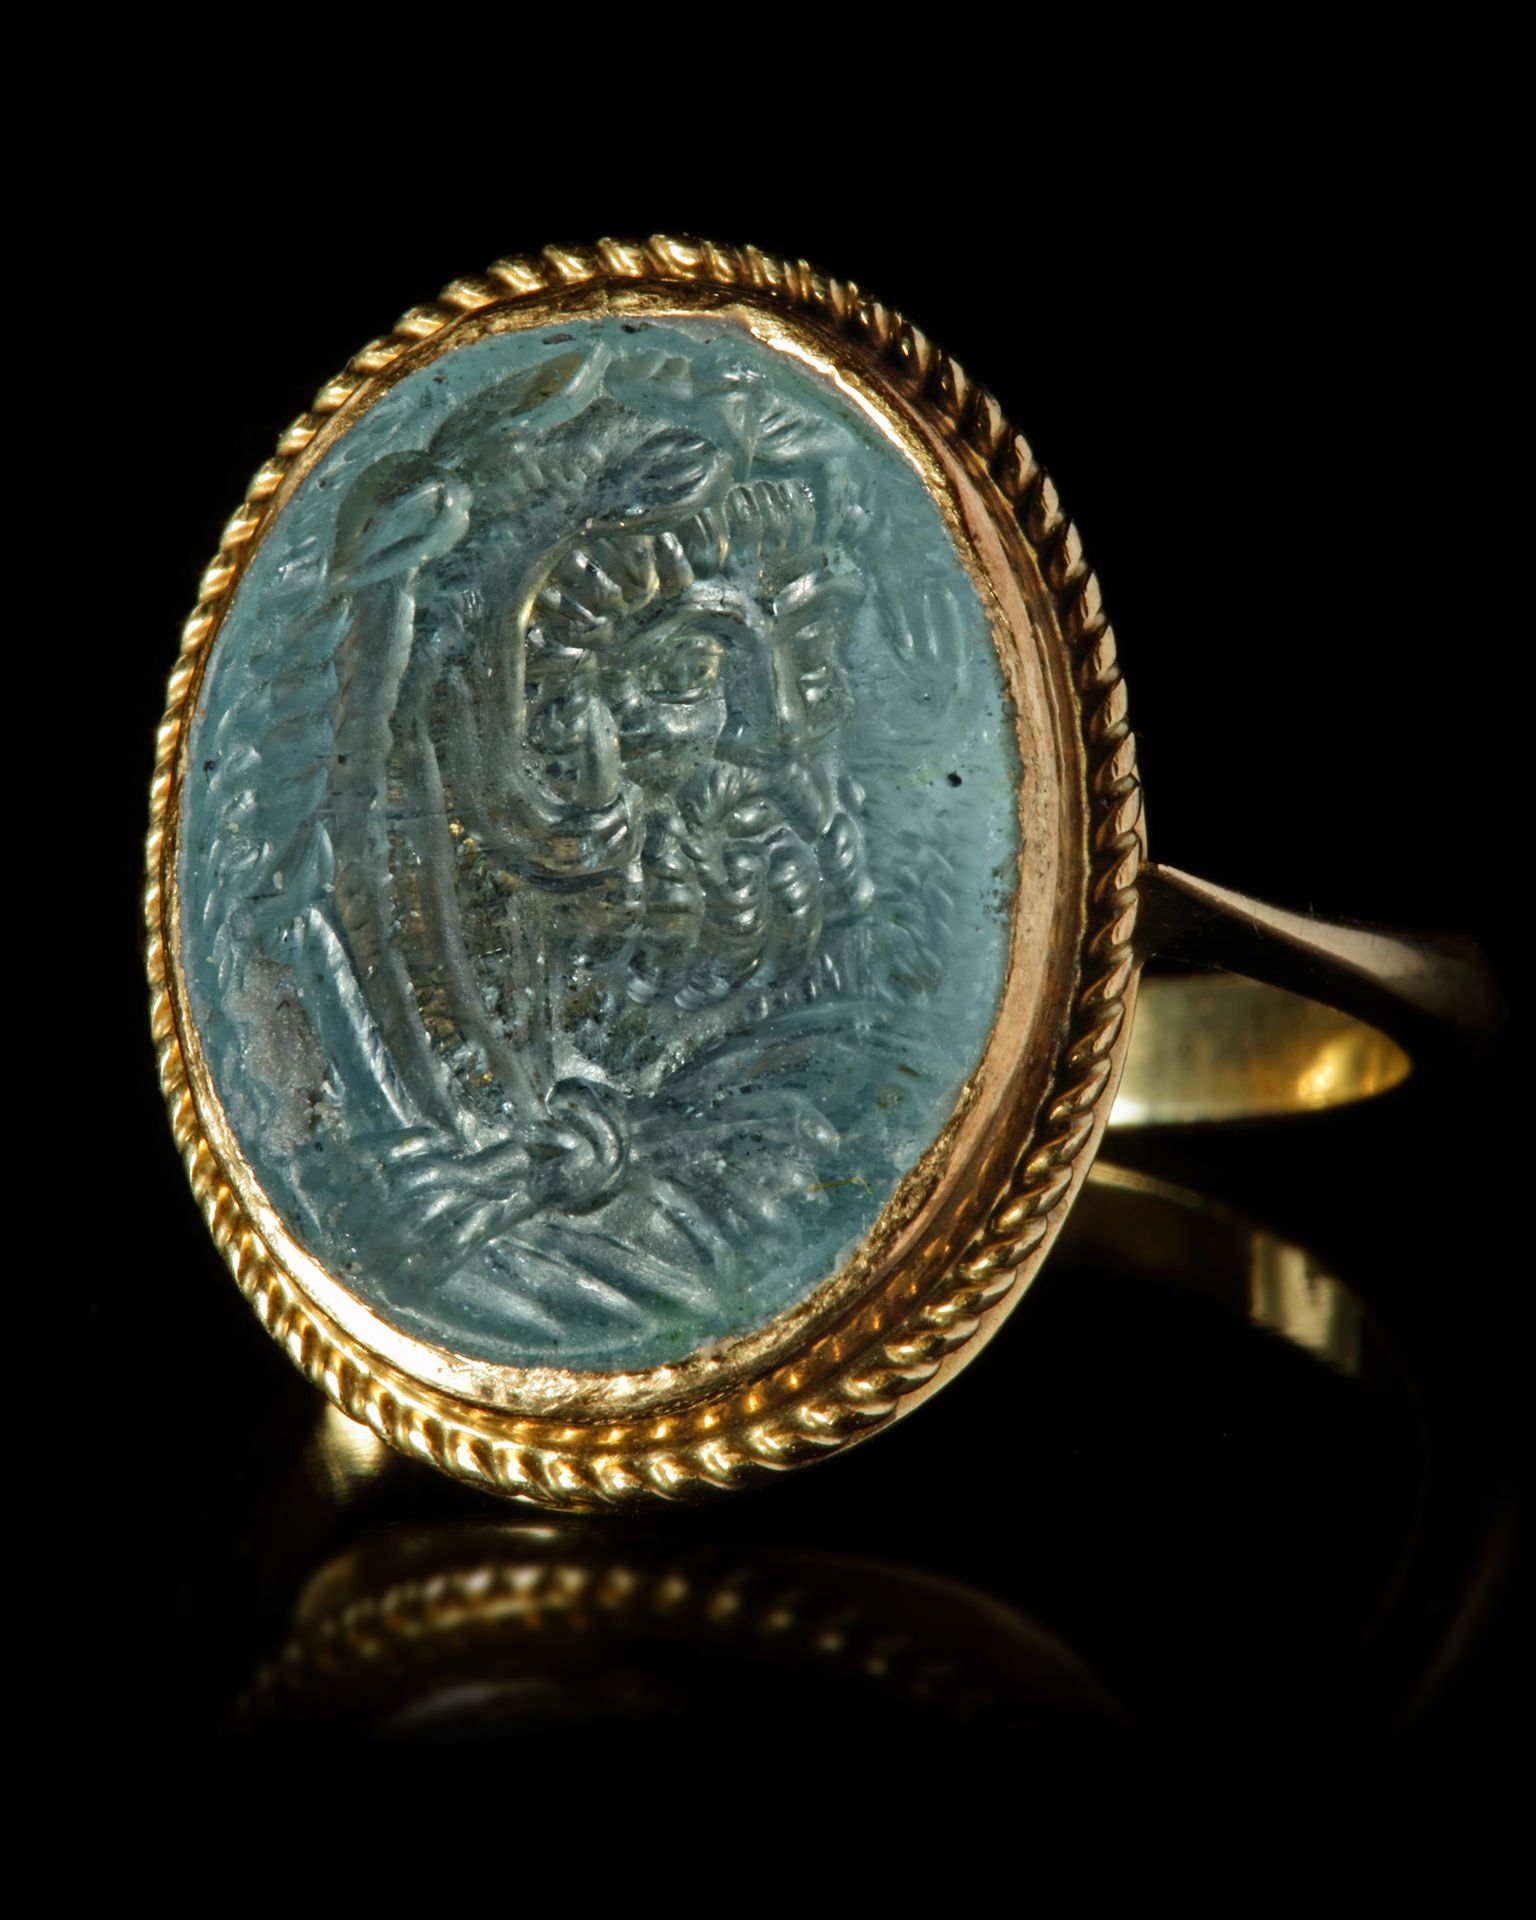 A BEAUTIFUL INTAGLIO IN AQUAMARINE OF A BUST OF HERCULES, 1ST CENTURY AD